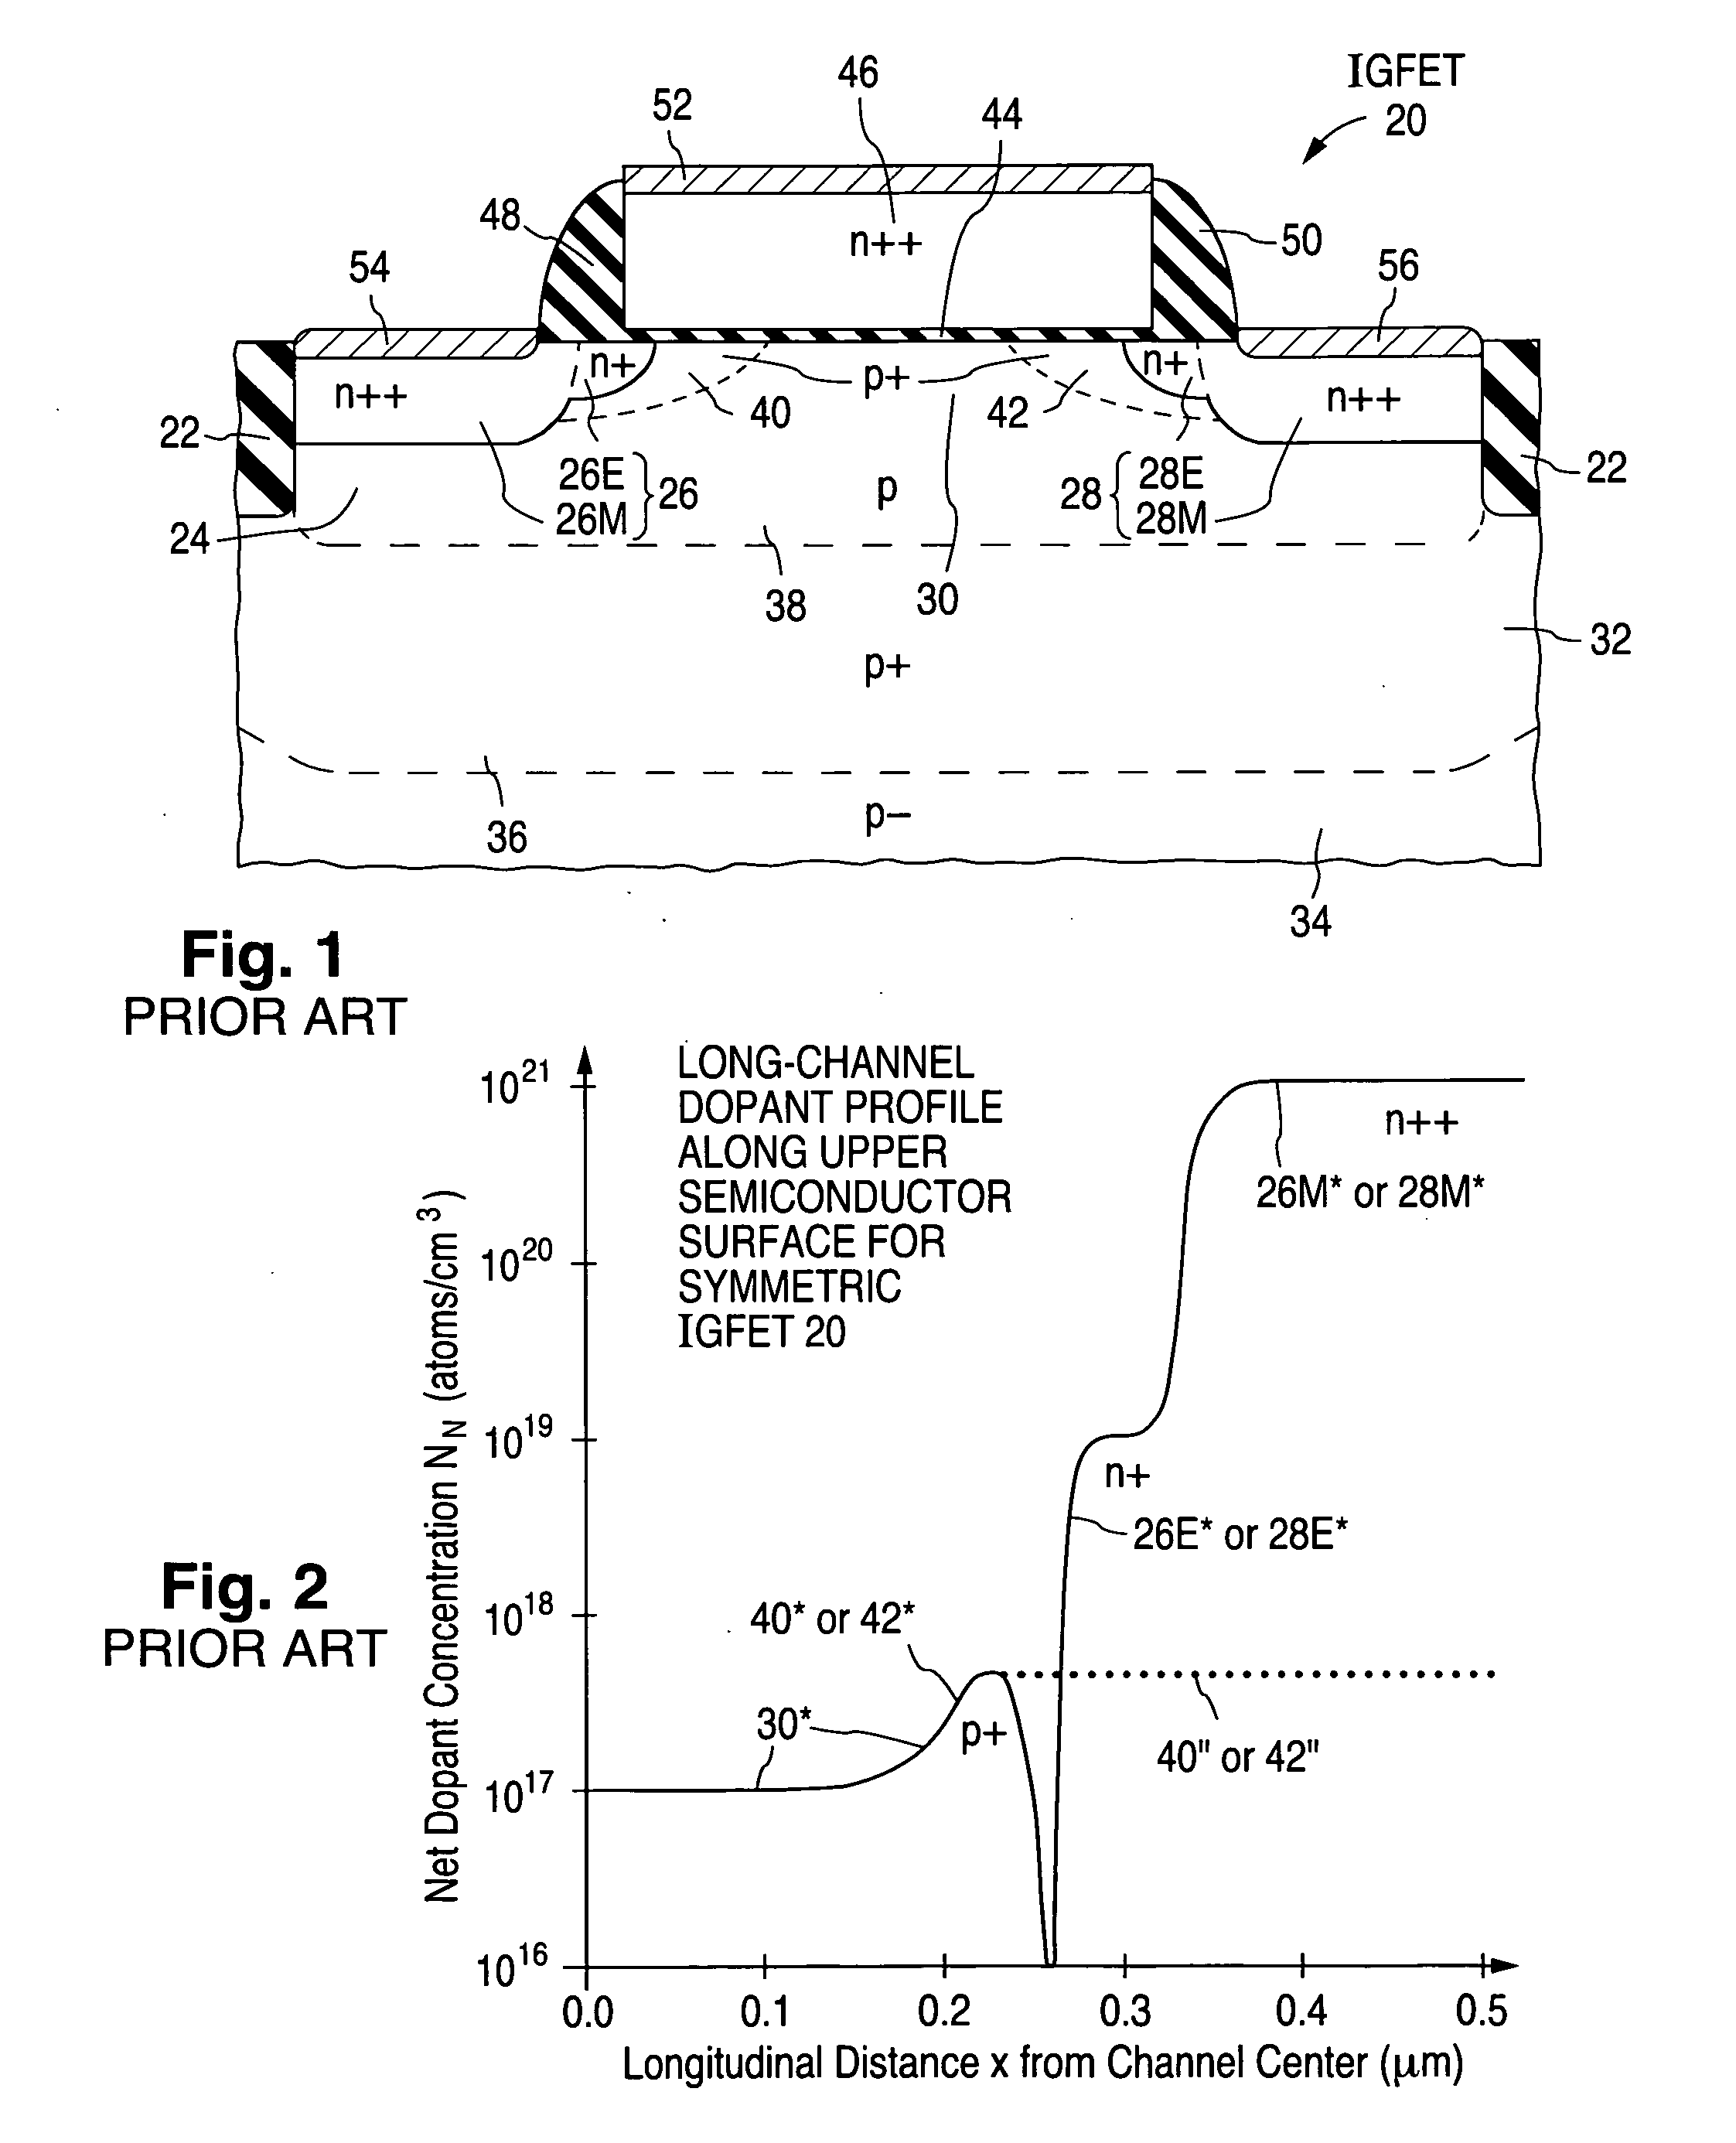 Configuration and fabrication of semiconductor structure in which source and drain extensions of field-effect transistor are defined with different dopants